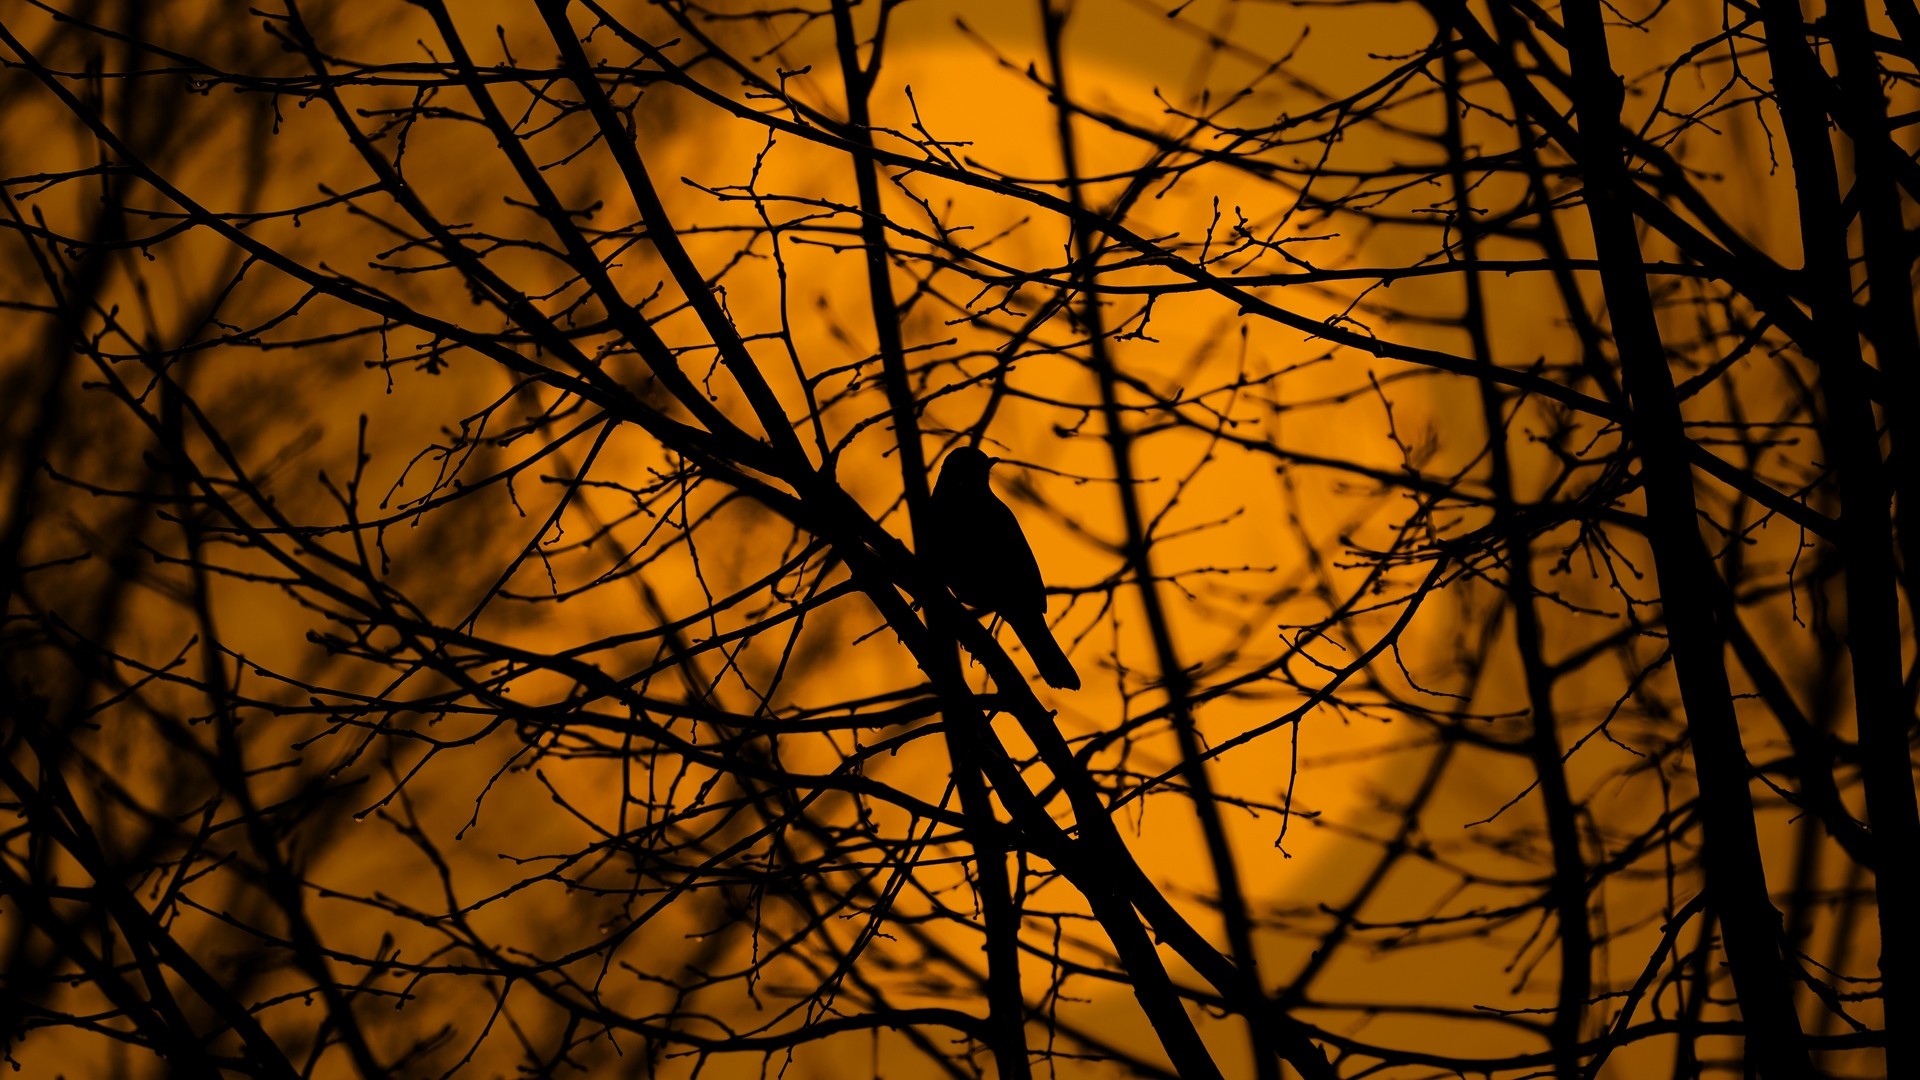 1920x1080 wallpapers: bird, trees, silhouette, branches, beautiful (image)